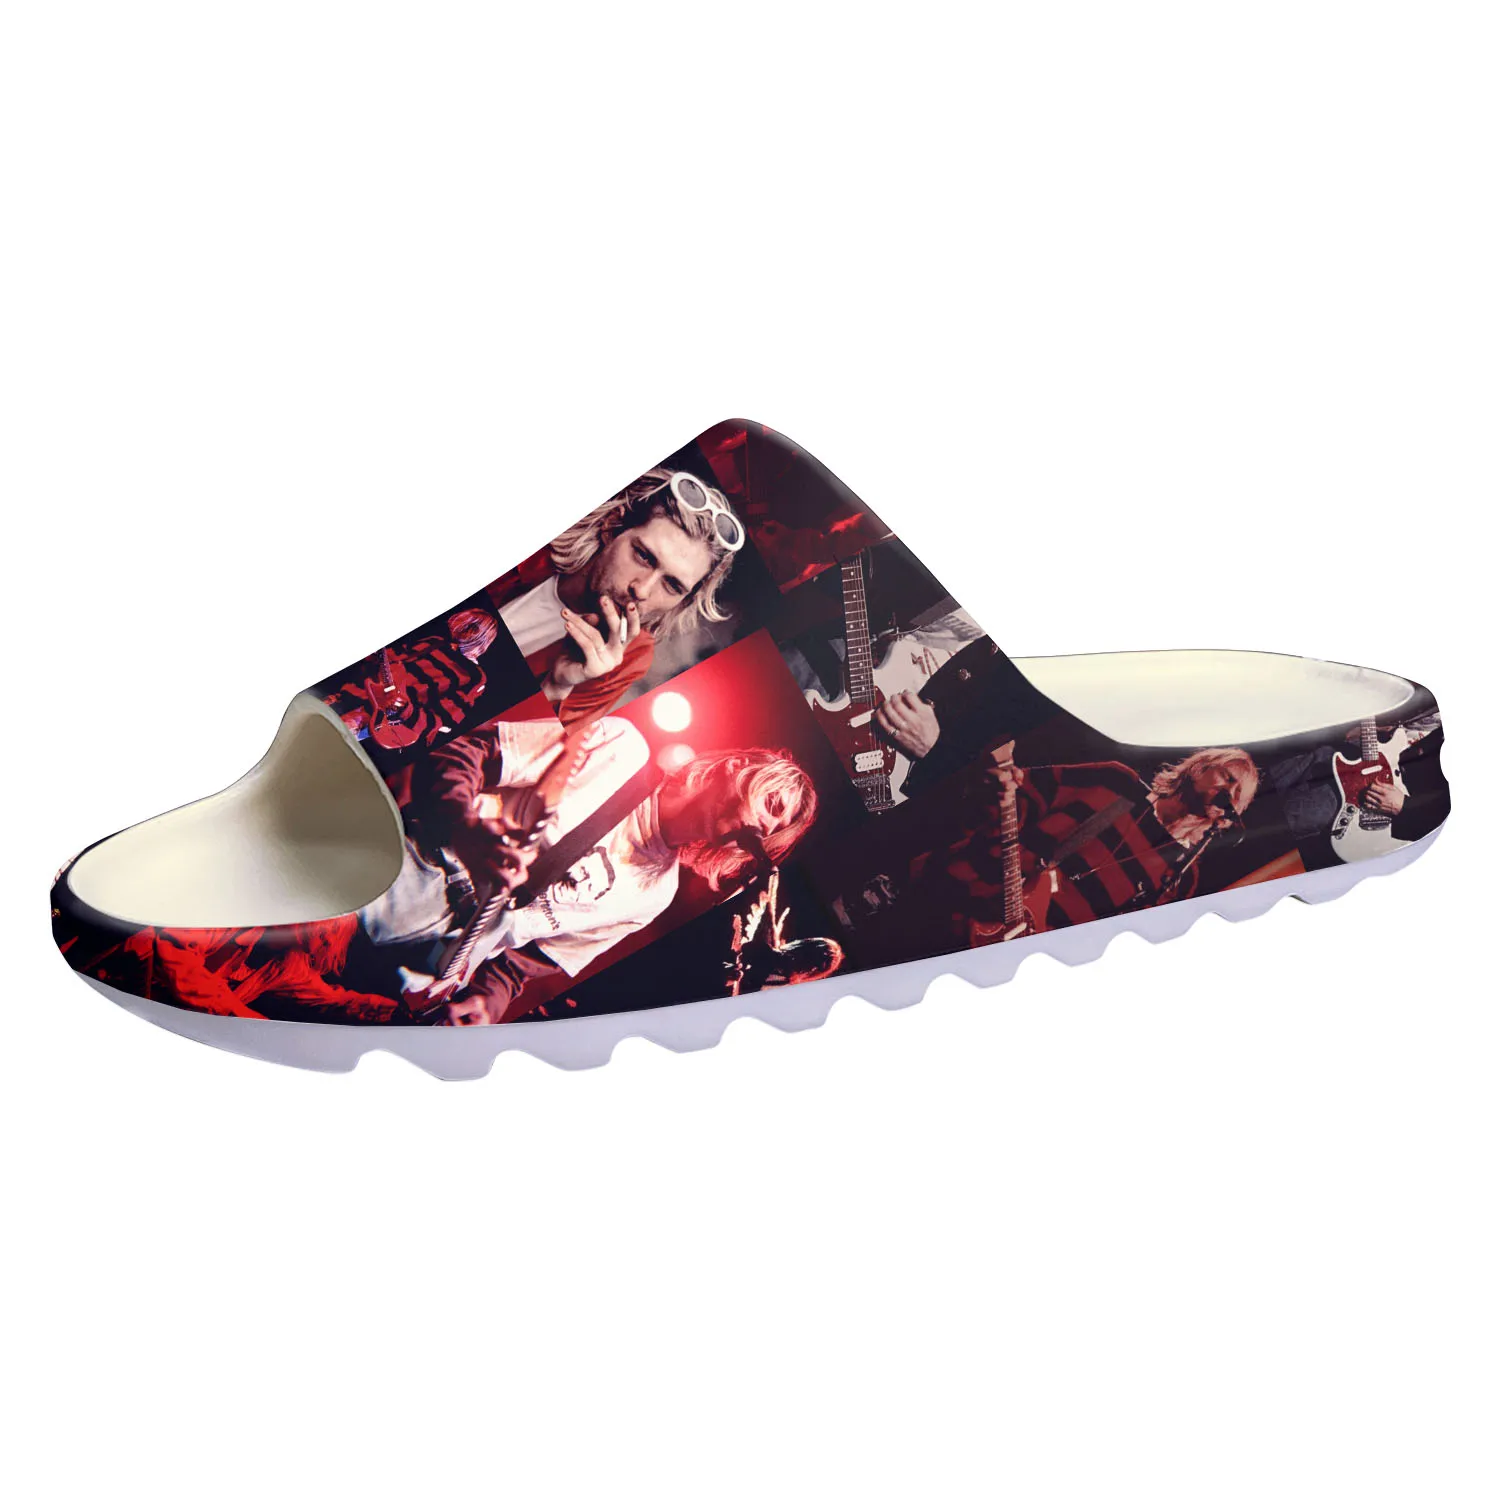 

Kurt Cobain Soft Sole Sllipers High Grade Home Clogs Customized Step on Water Shoes Mens Womens Teenager Beach on Shit Sandals